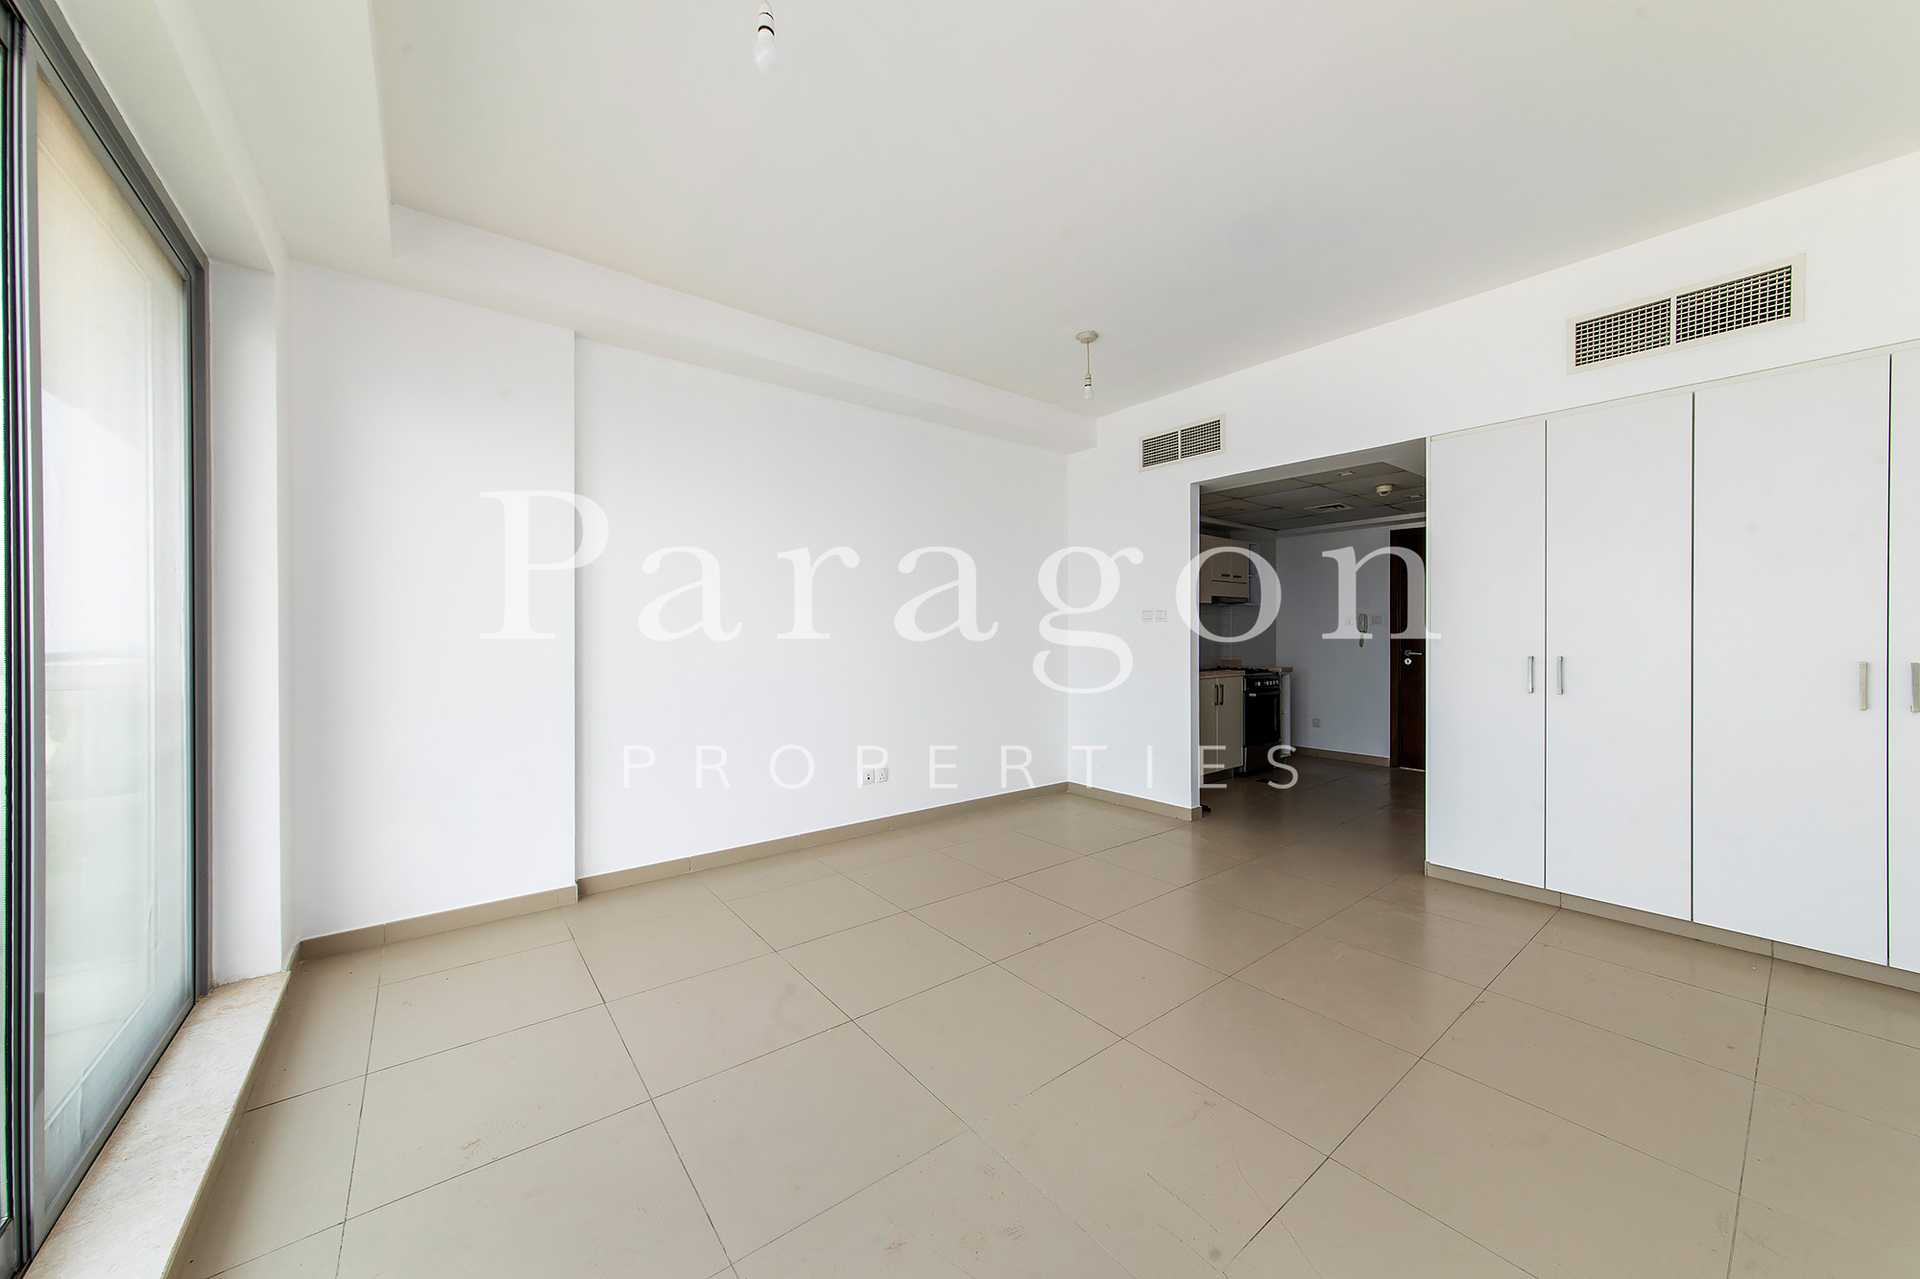 Condominium in Cooranbong, New South Wales 12452350